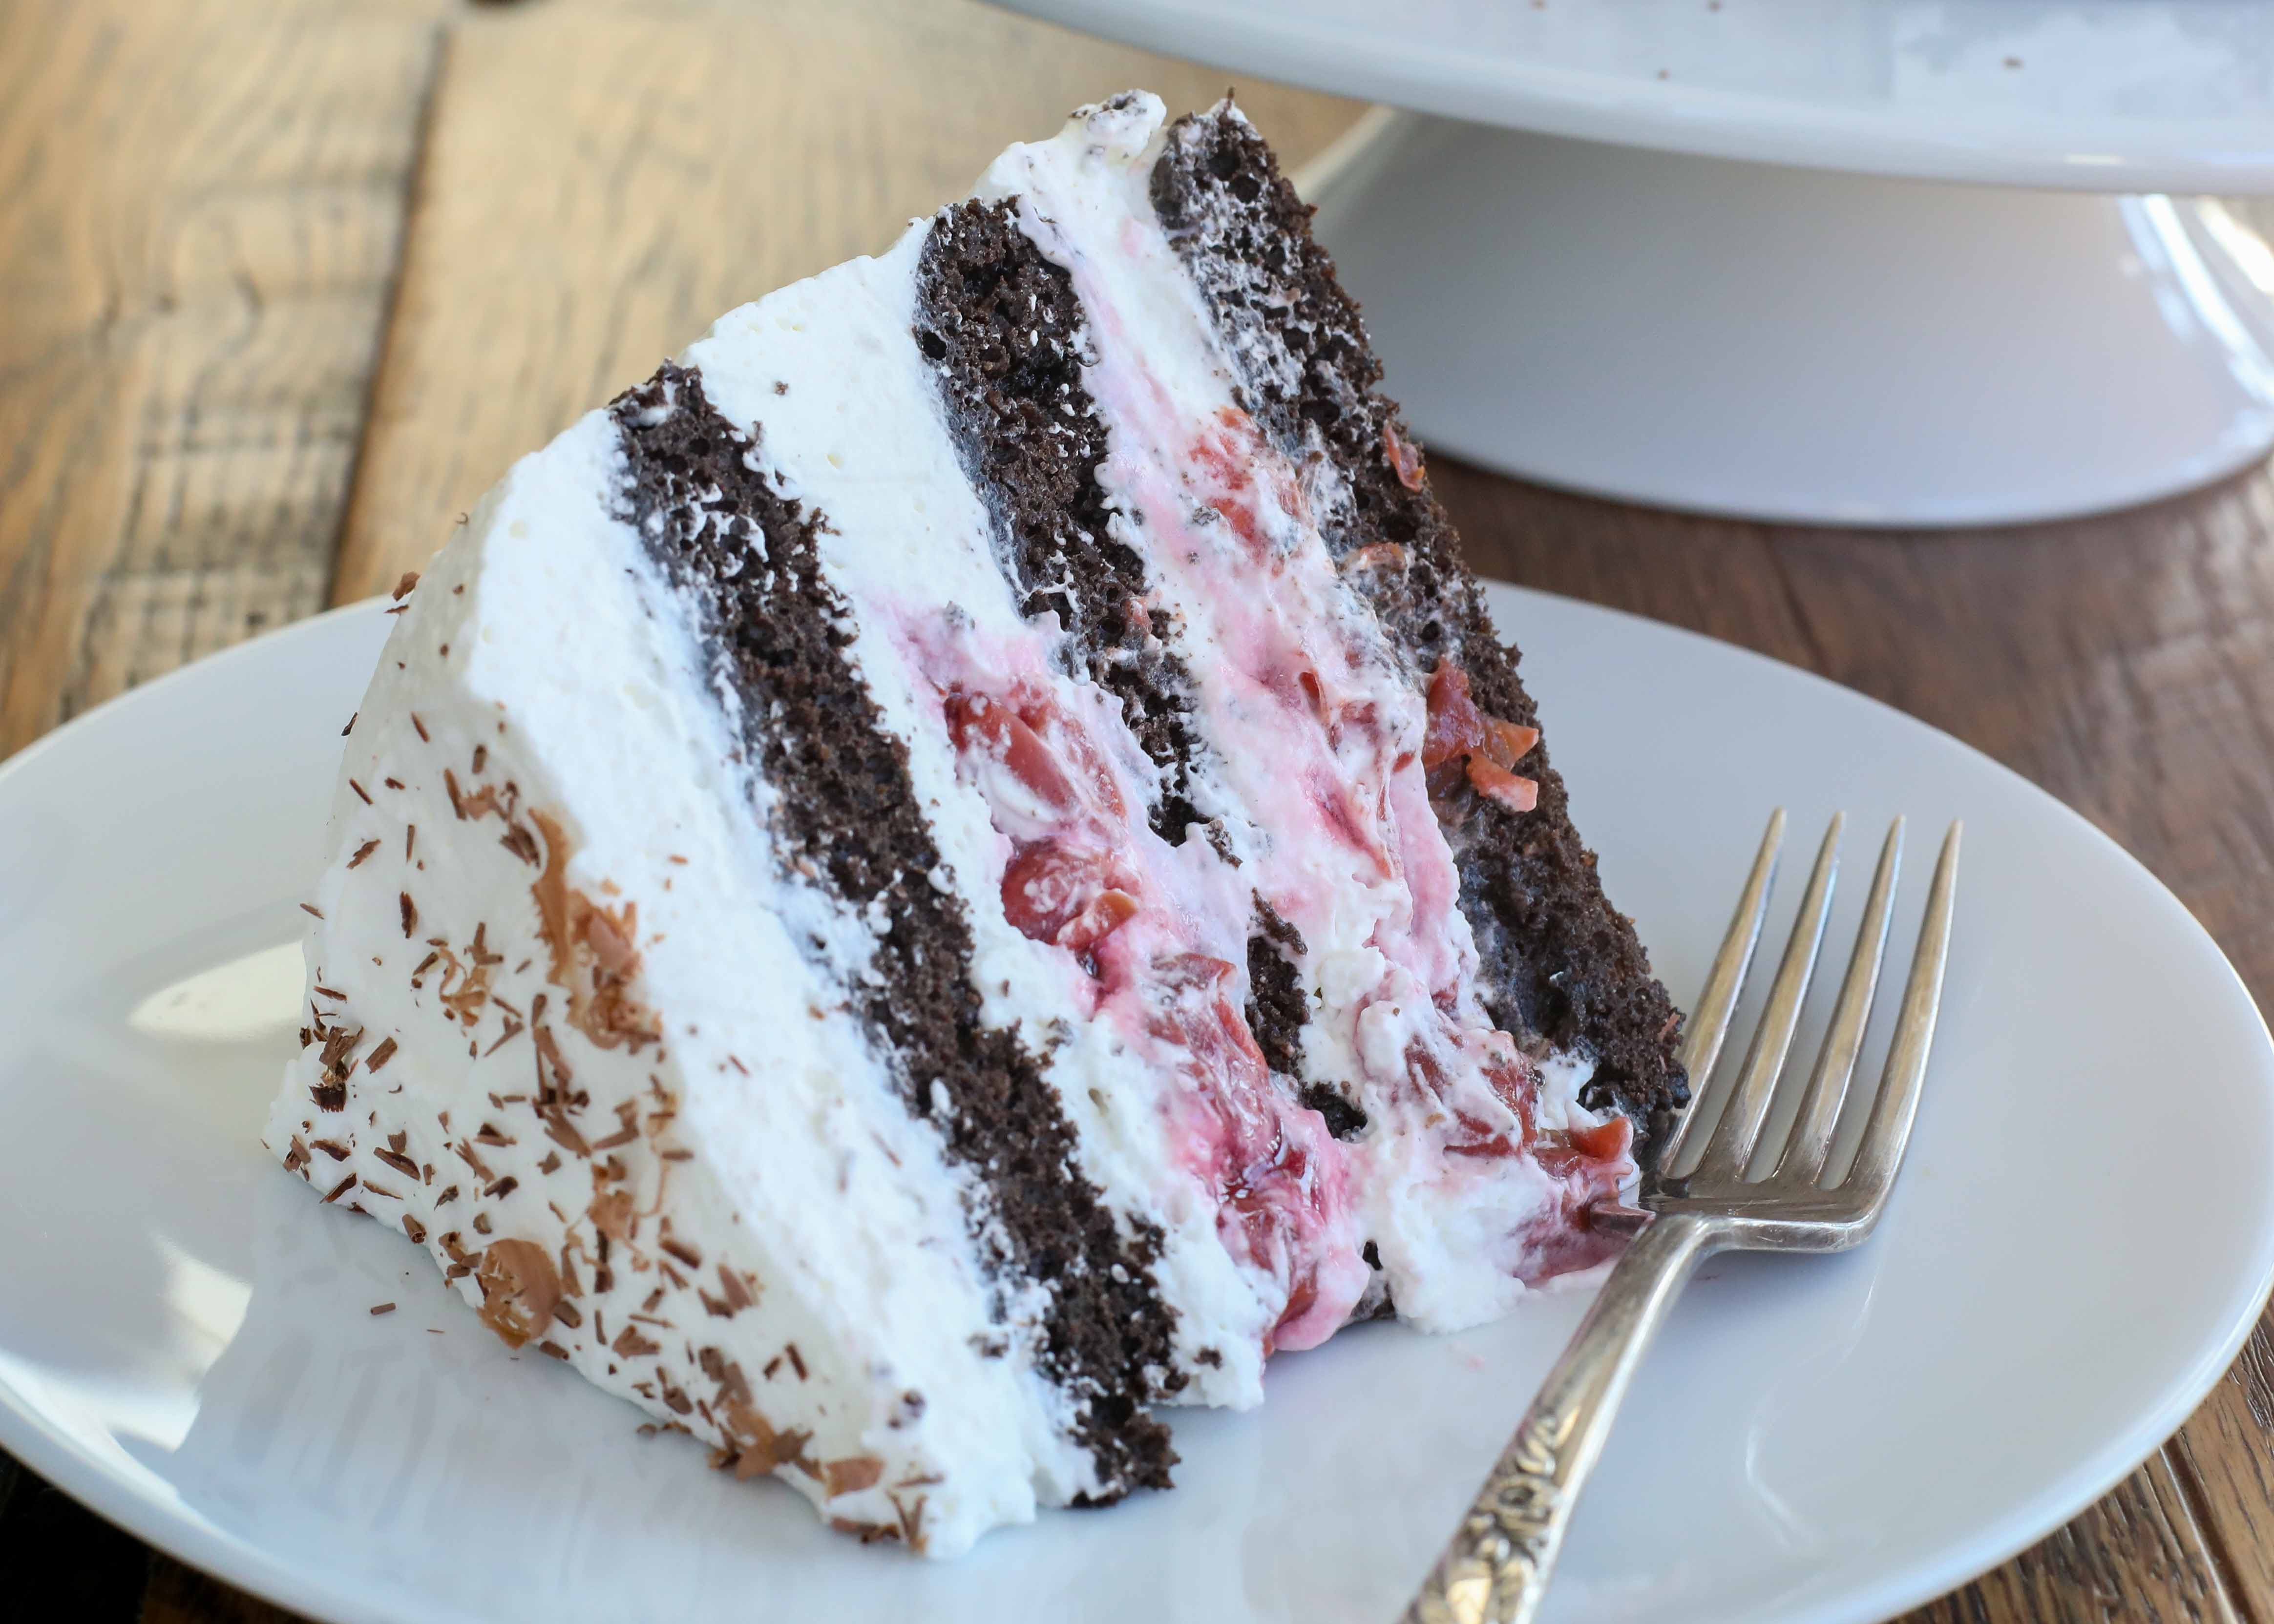 Eggless Black Forest cake - FLOURS & FROSTINGS